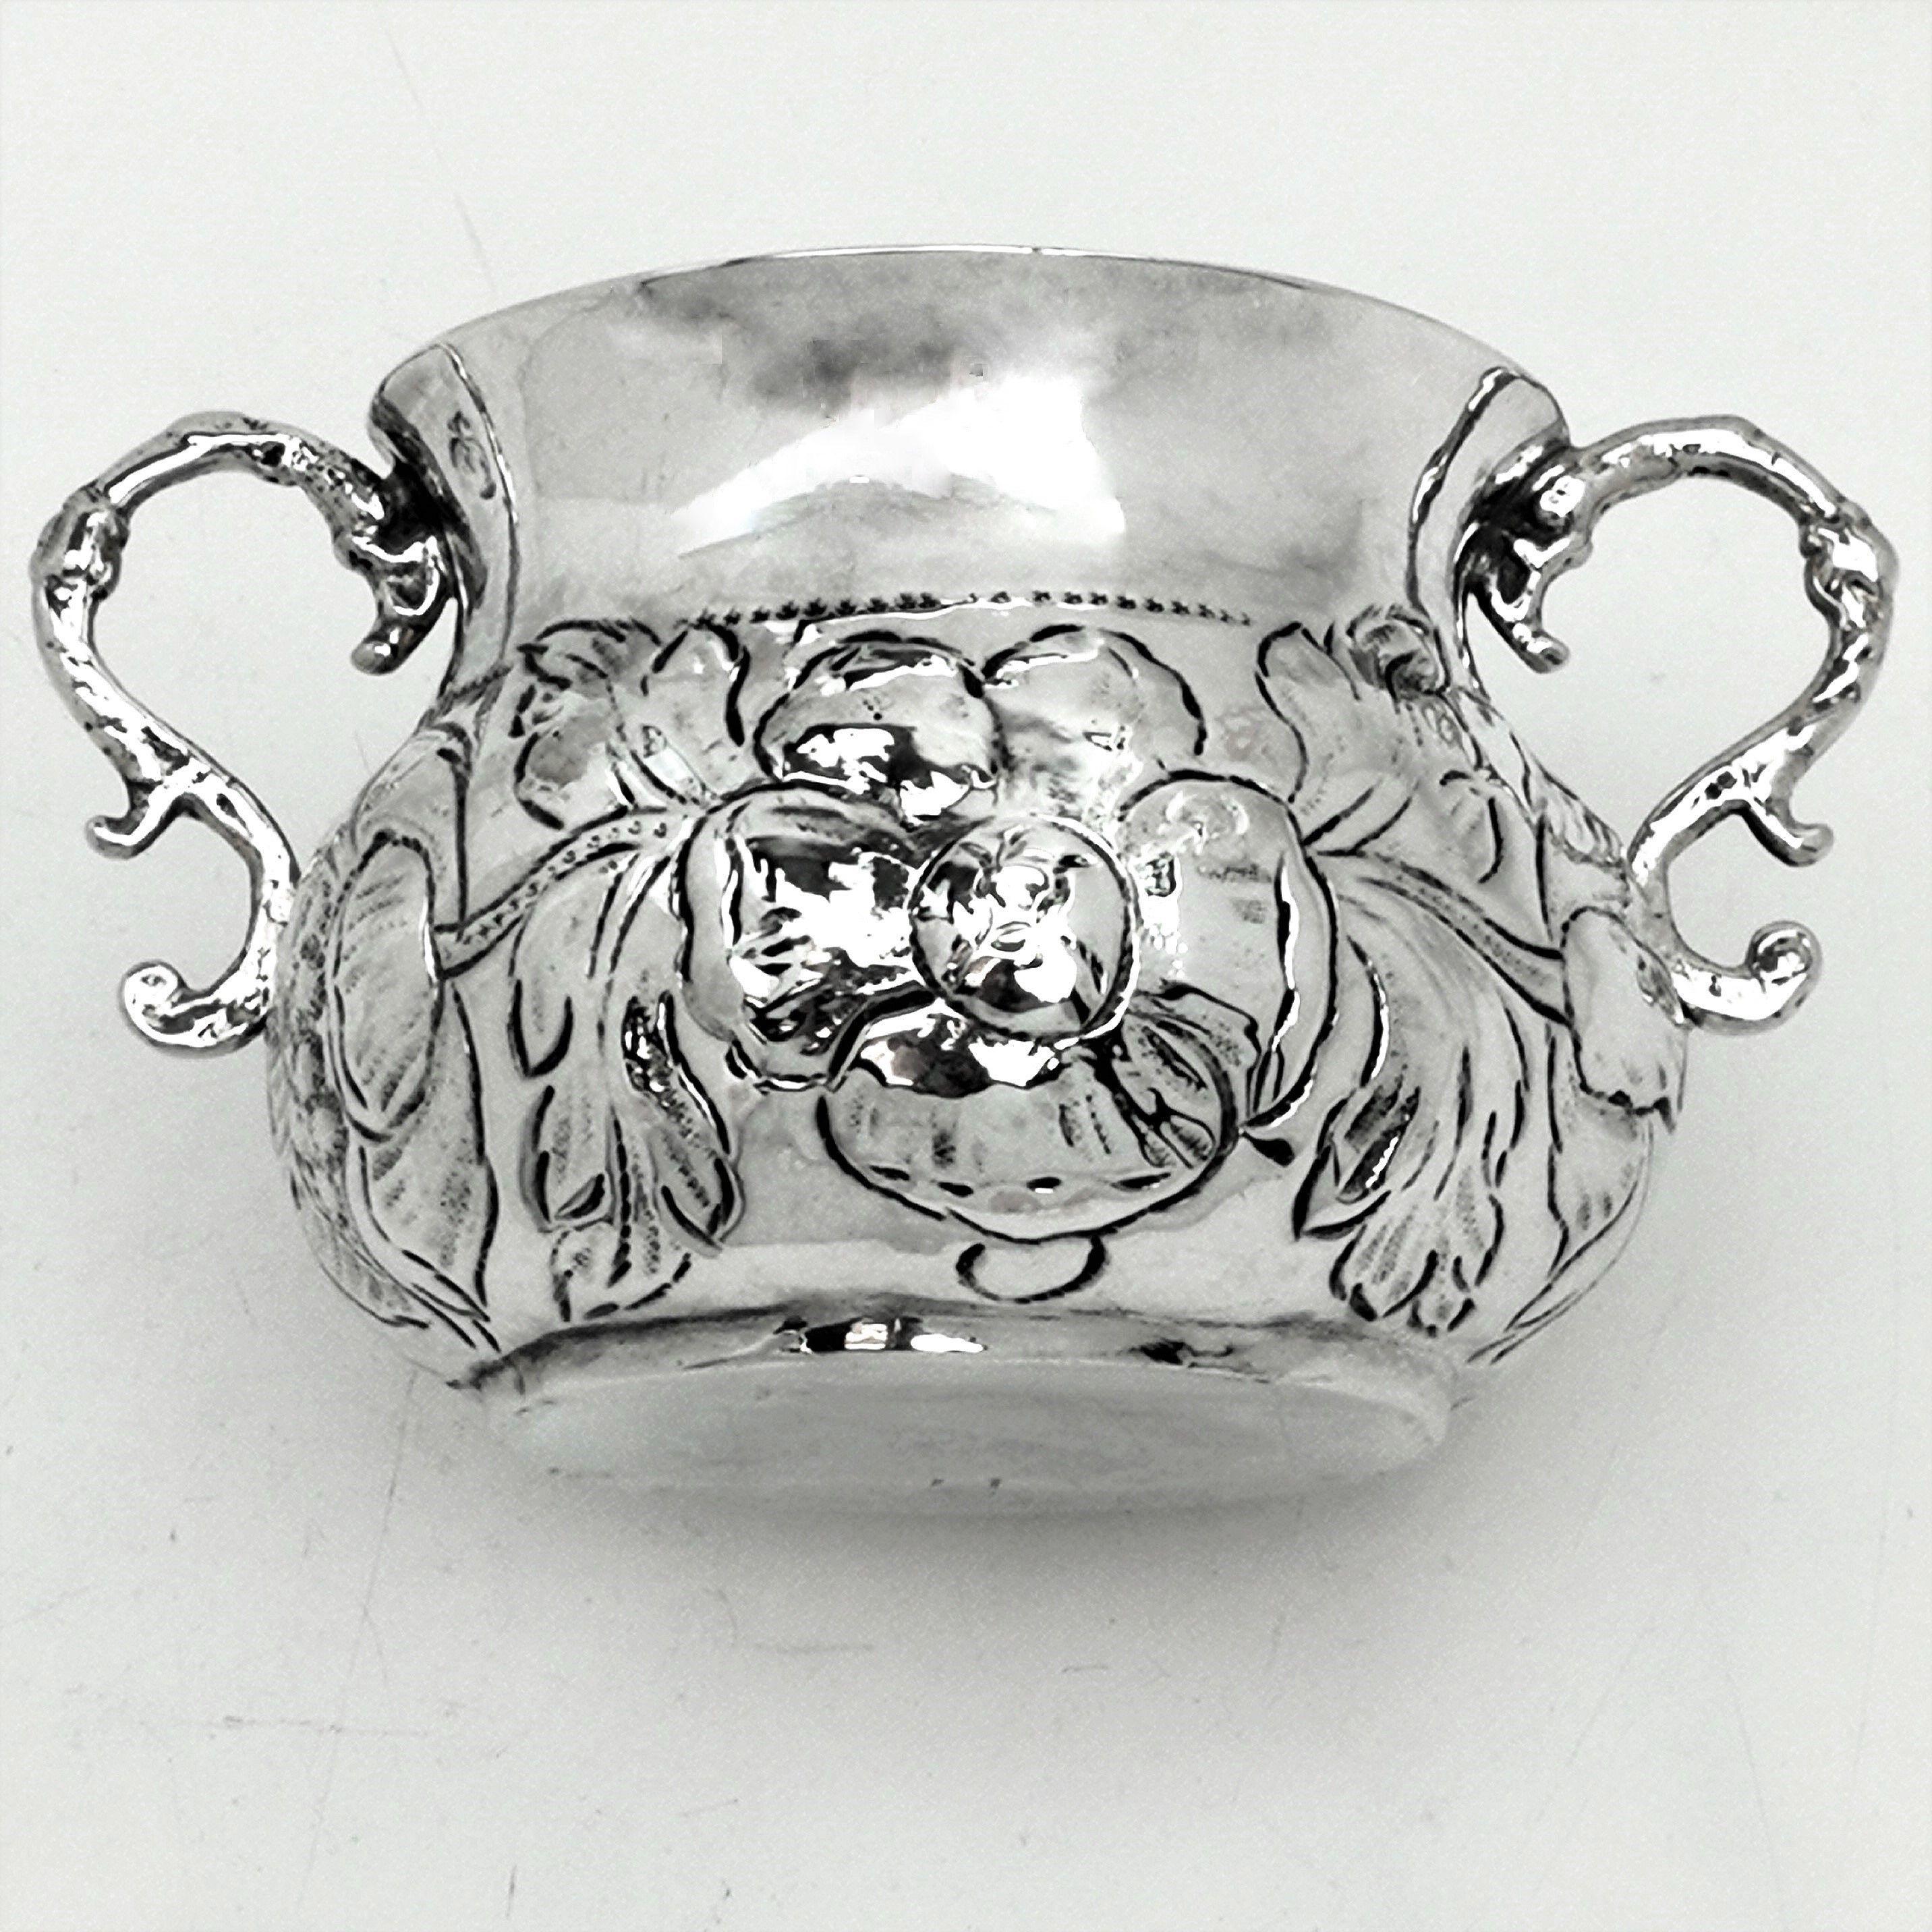 A wonderful 17th century Charles II Antique solid Silver Porringer / two handled Cup with an ornate chased floral design around the bellied body of the Cup. The Cup has two elegant scroll handles.

Made c.1675 by maker TA (Makers Mark in Jackson's